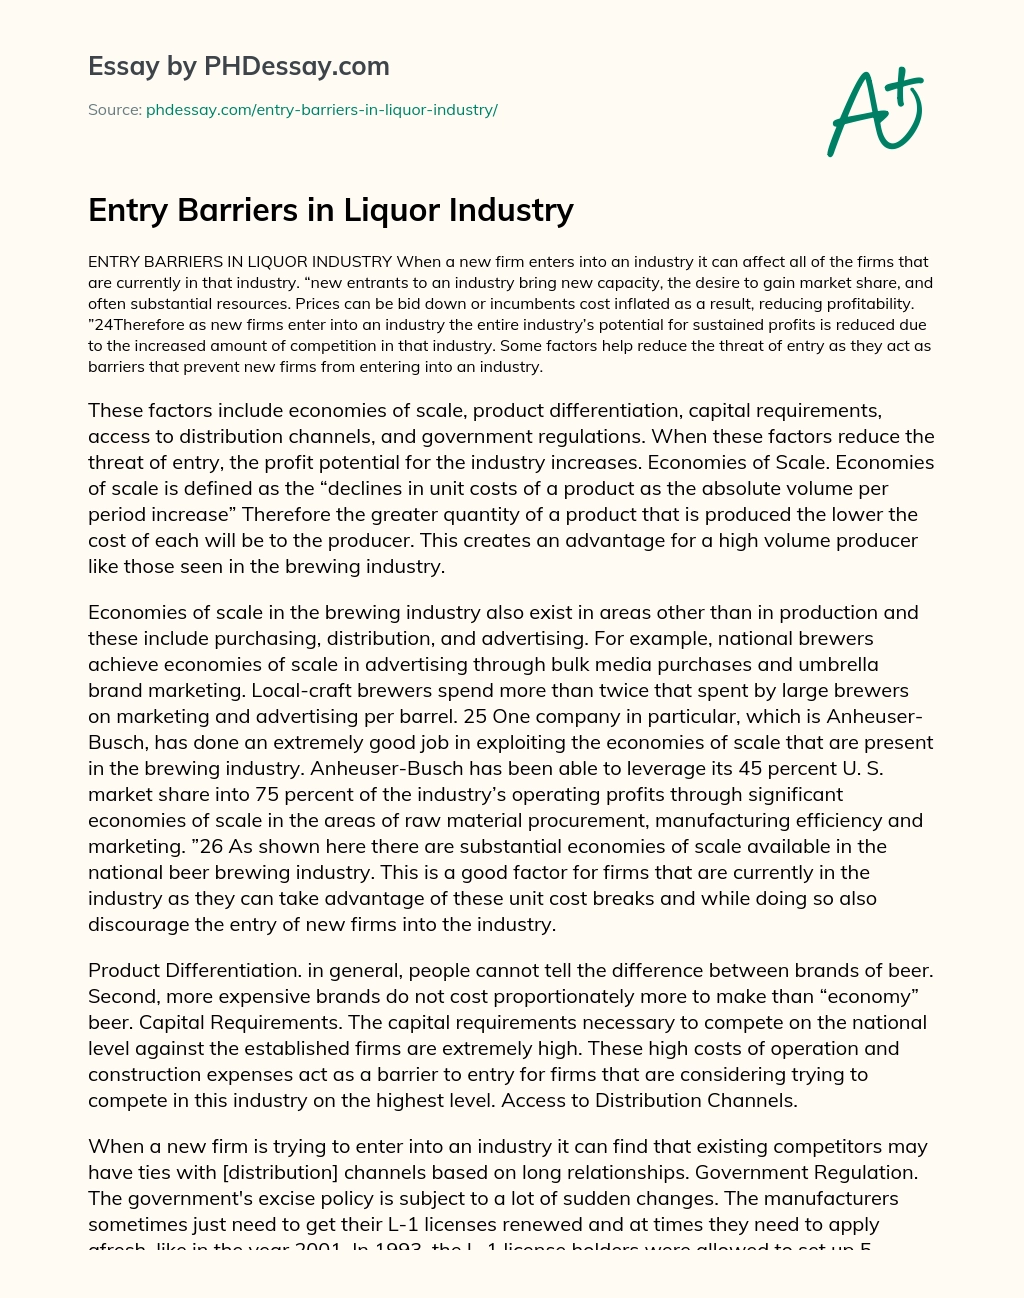 Entry Barriers in Liquor Industry essay